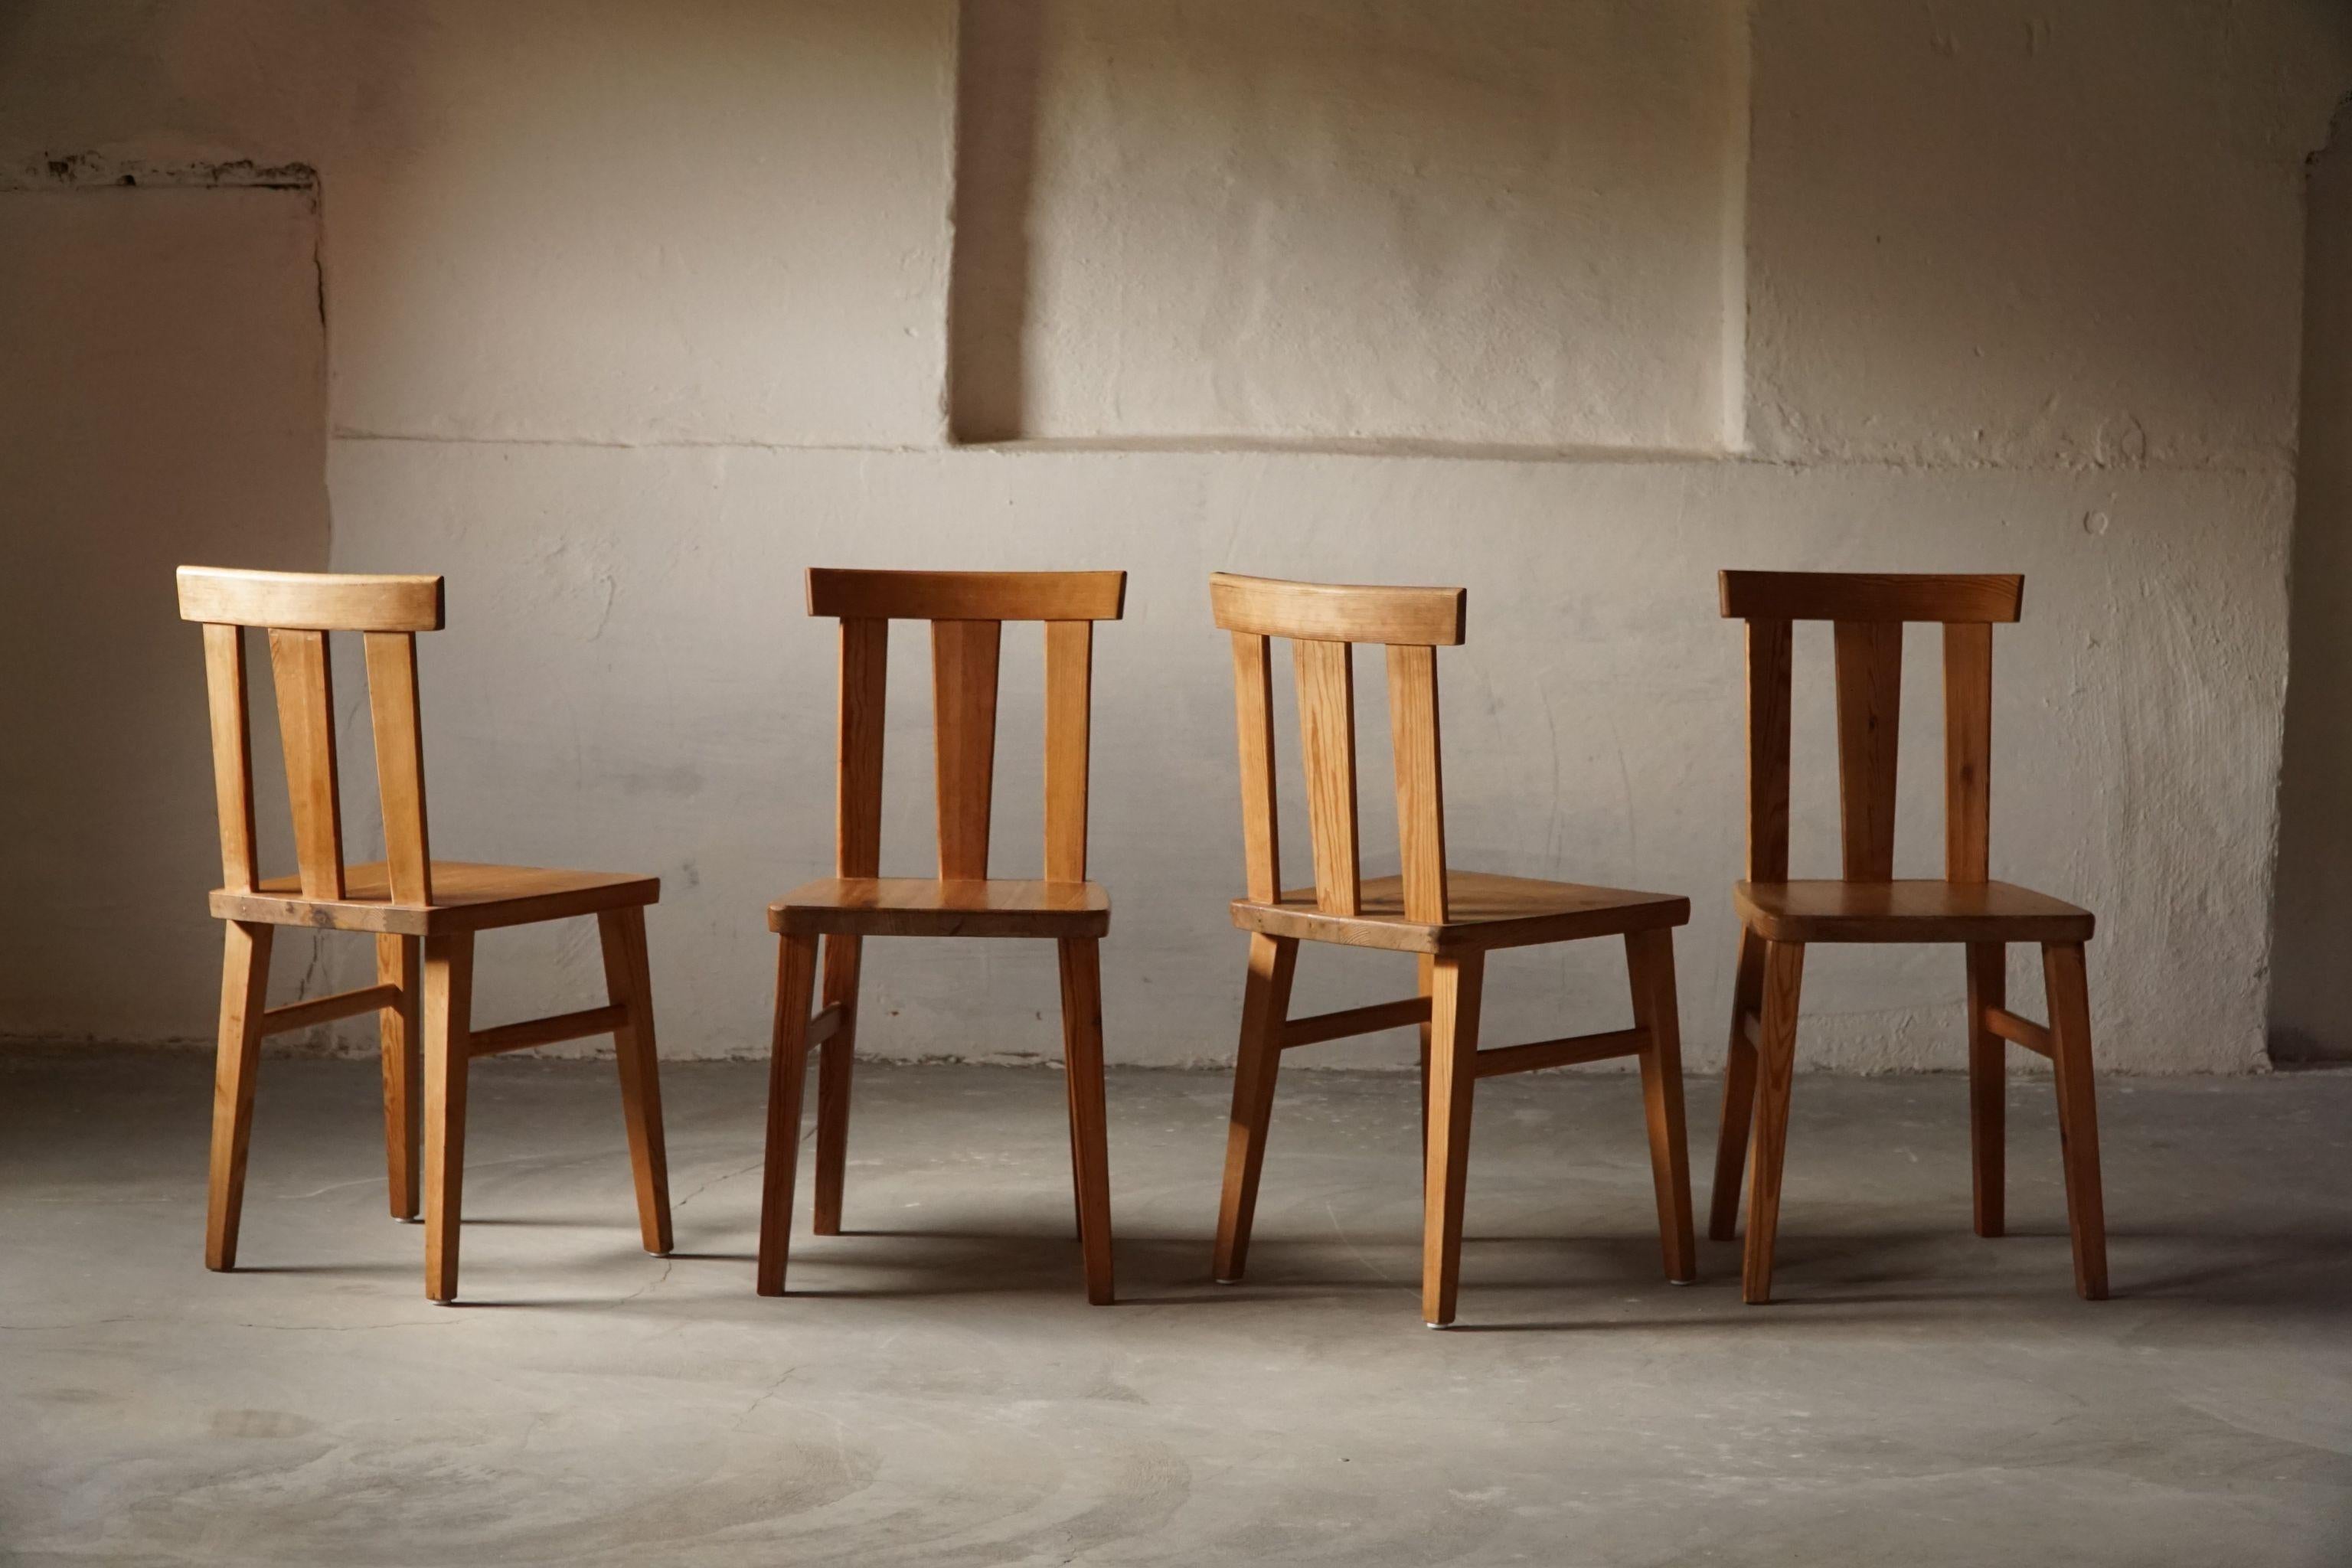 A set of 4 dining chairs in solid pine, by a Swedish Cabinetmaker in 1930s.
Made in the style of Axel Einar Hjorth´s iconic chairs, model